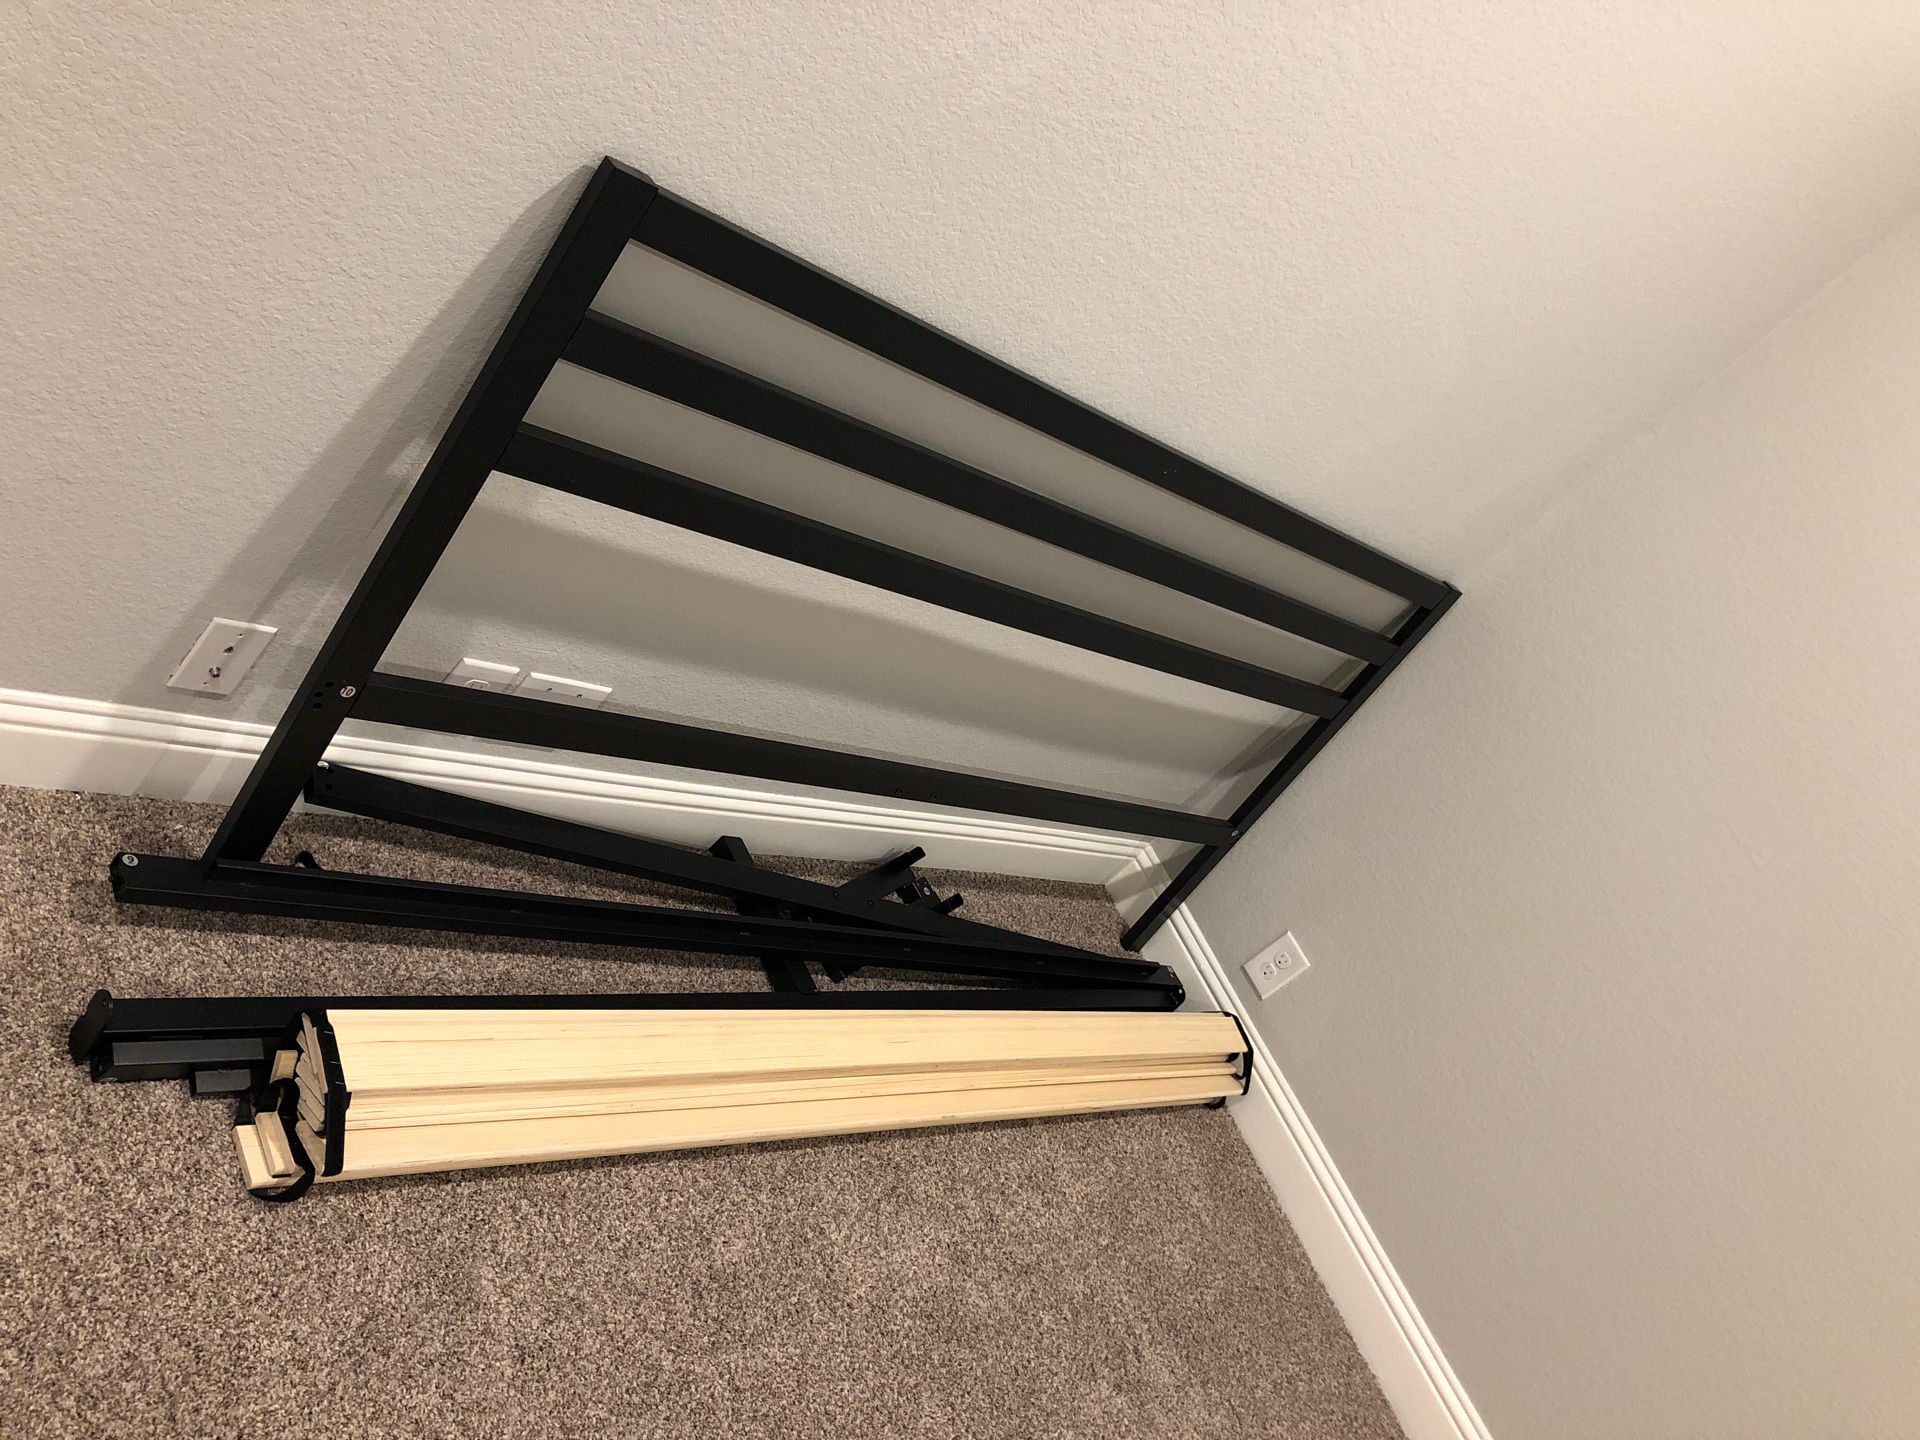 King size Bed frame brand open box assembled but never used